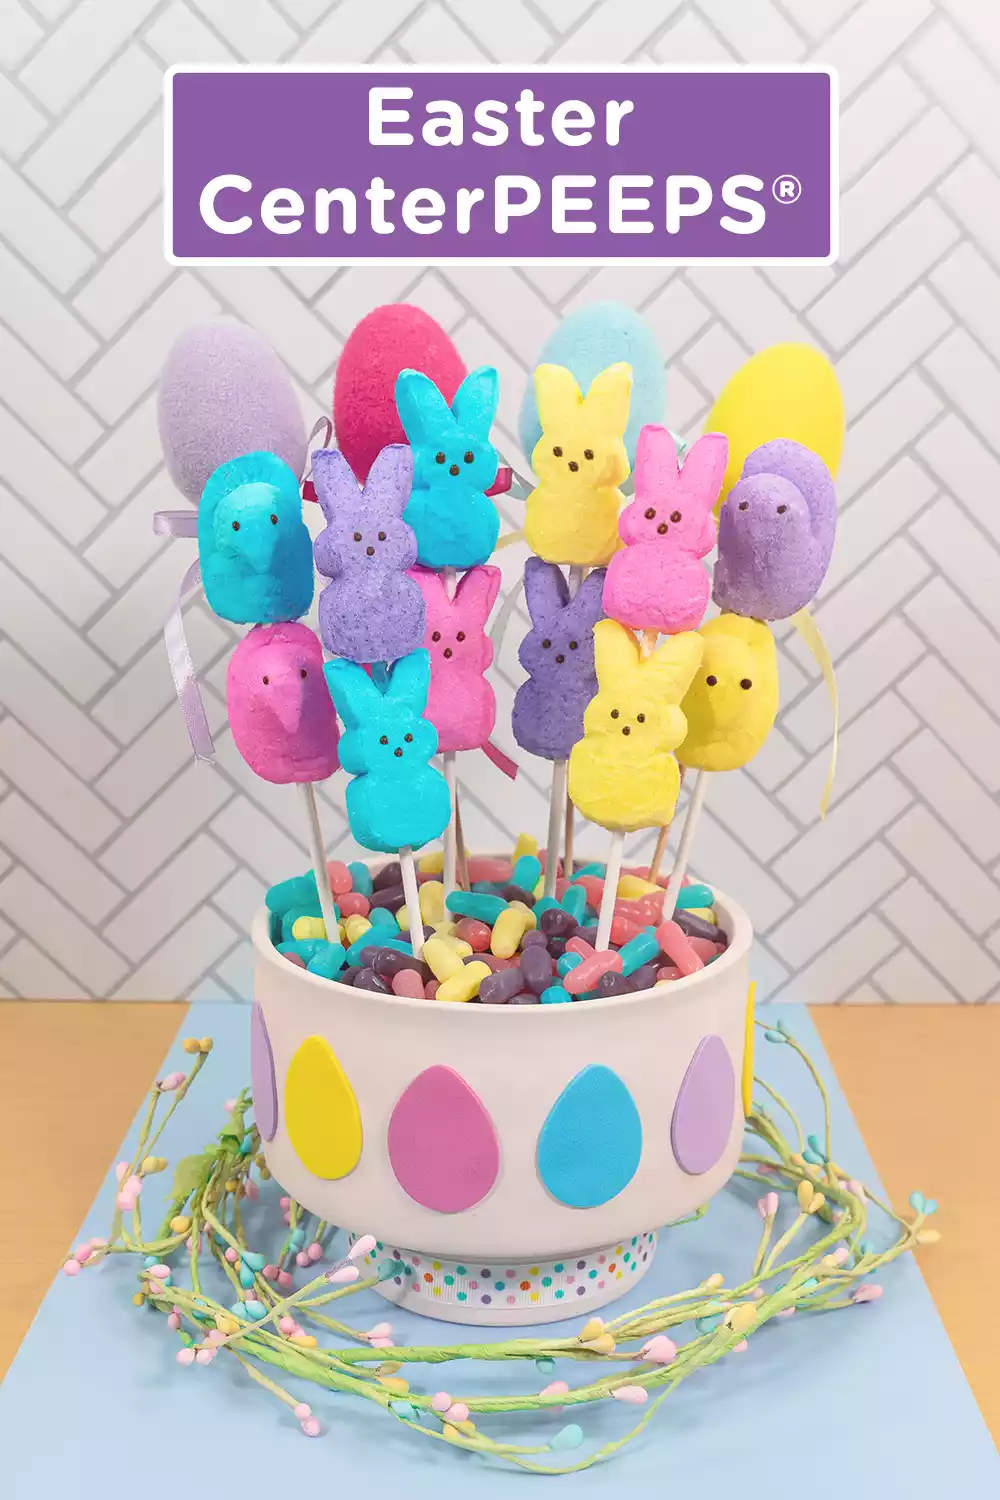 Easter CenterPEEPS<sup>®</sup>